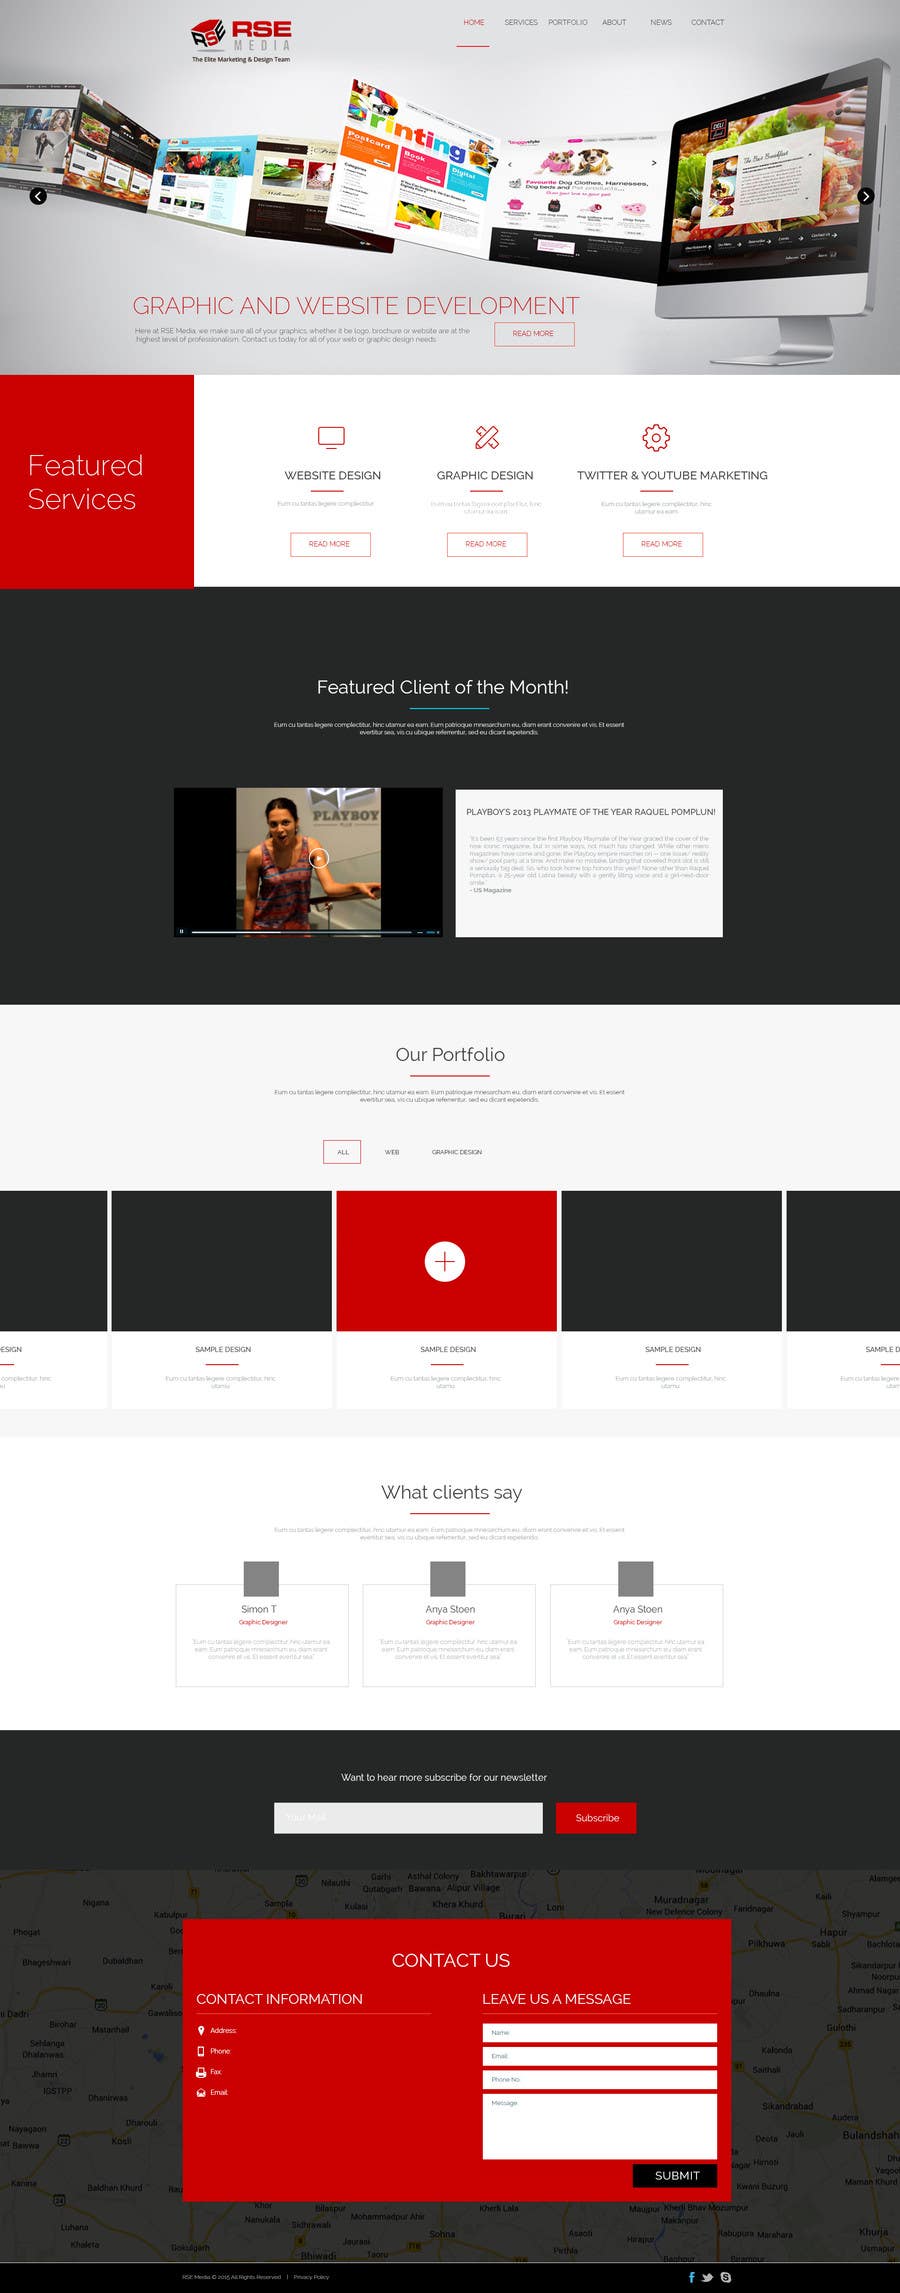 Contest Entry #3 for                                                 Design a website mockup for a software company
                                            